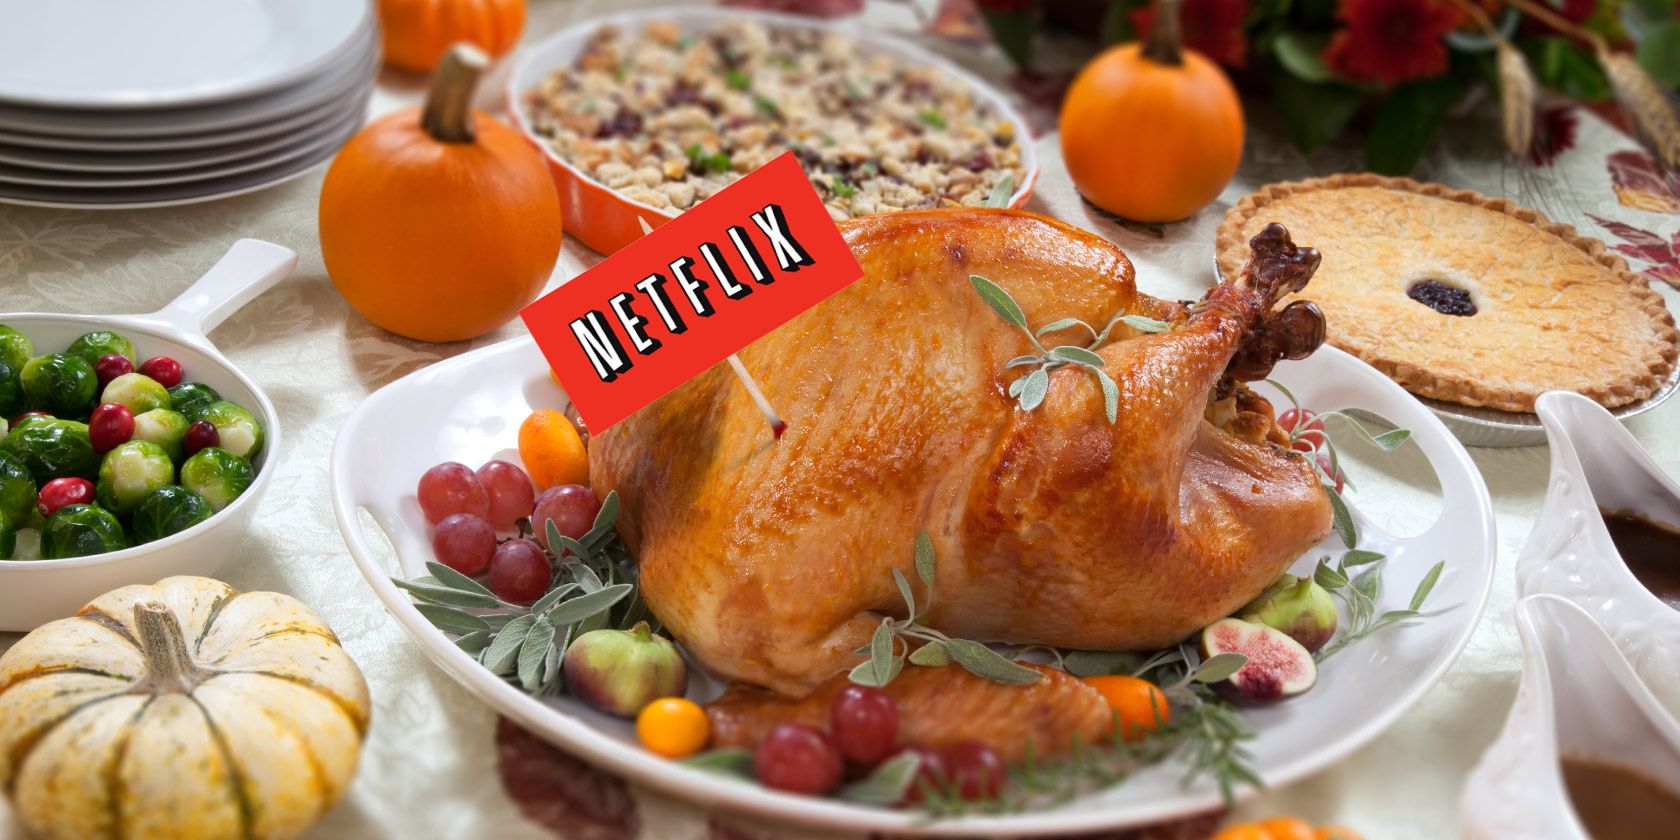 13 Netflix Movies to Watch With Family This Thanksgiving